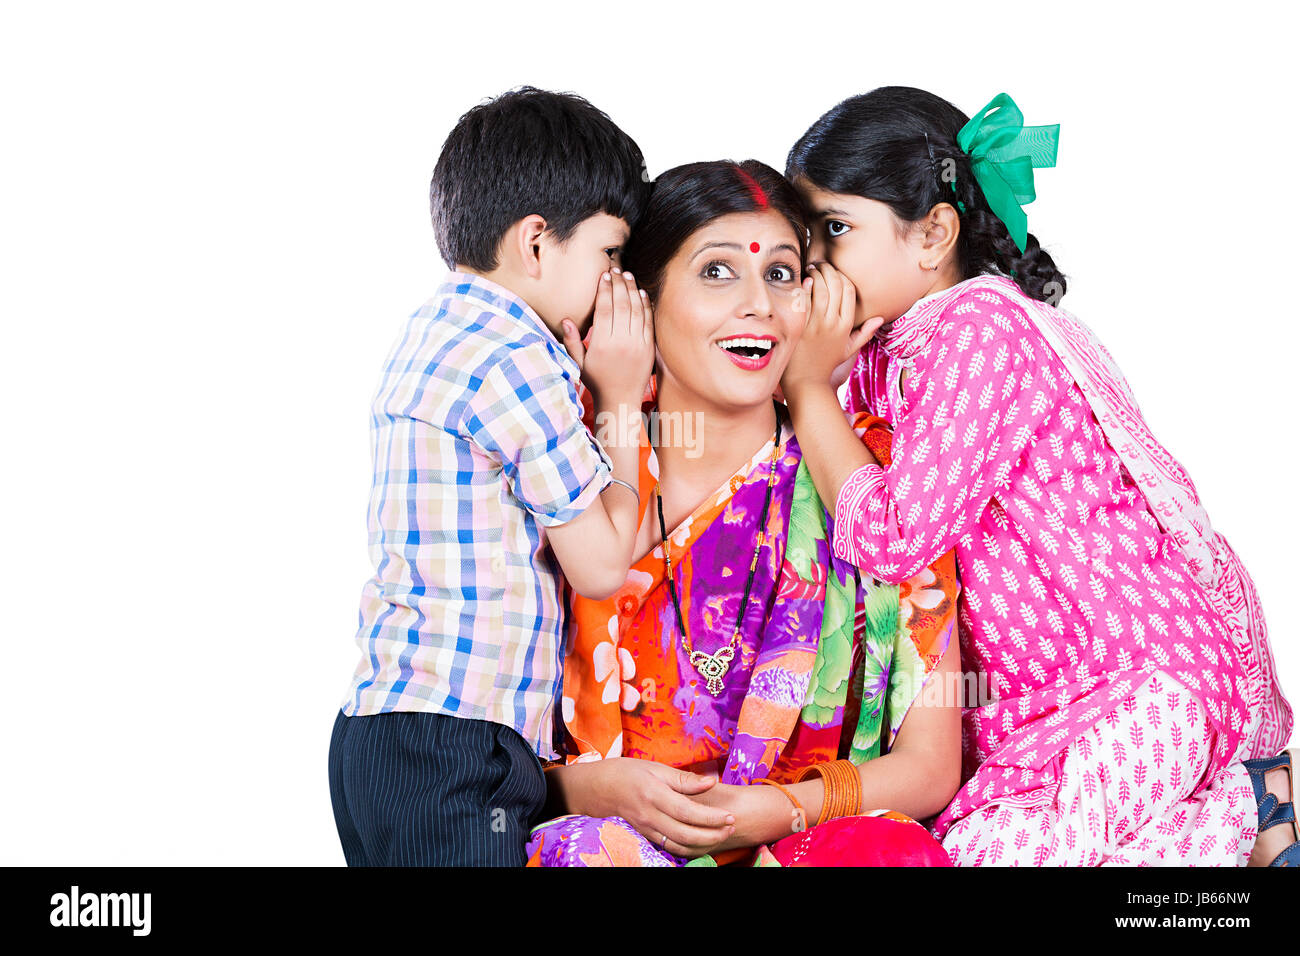 Happy Indian Rural 2 Children Whispering Mother In The Ear Secret s Stock Photo